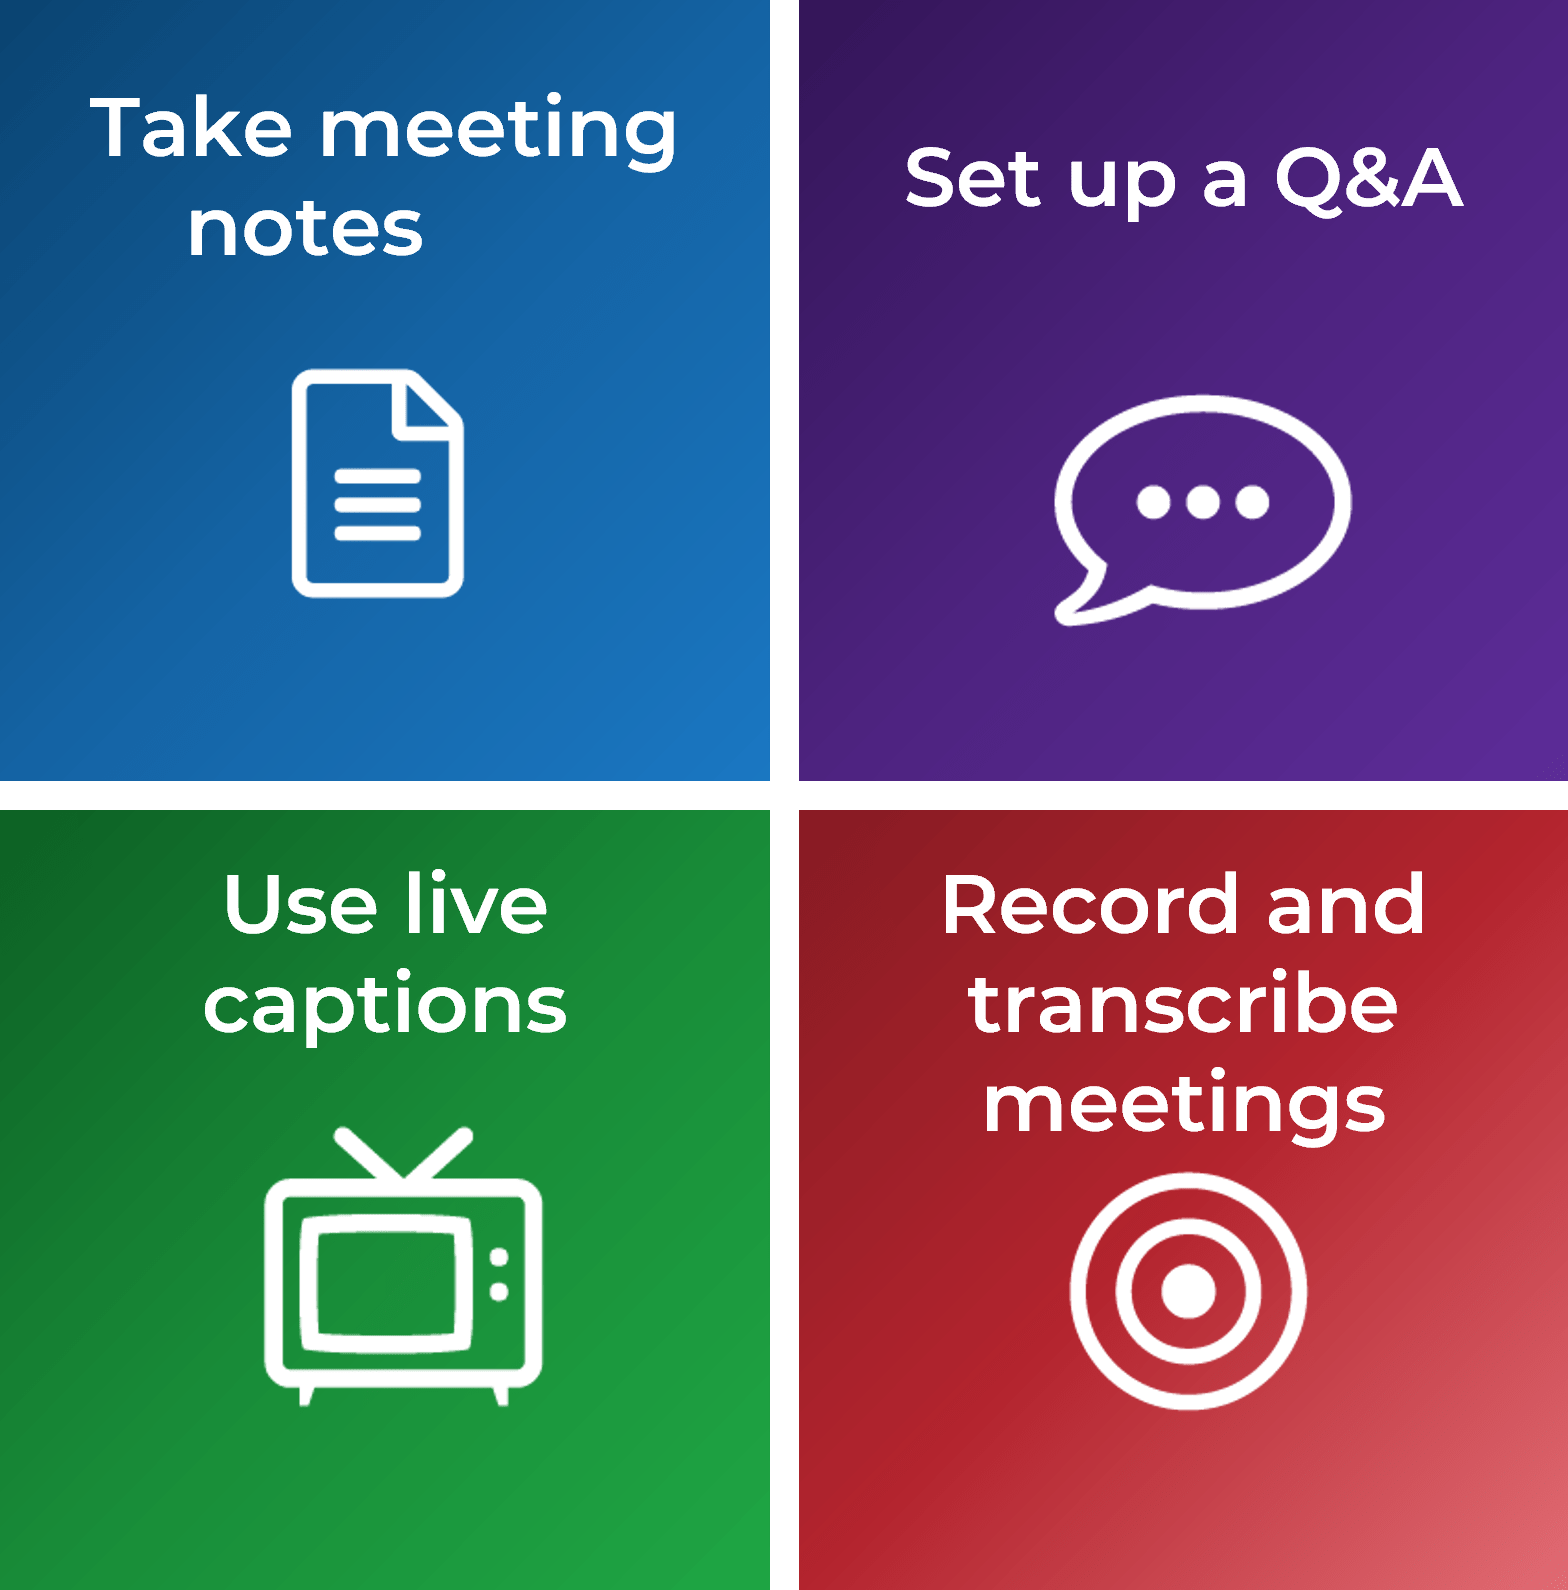 Samples of four features: 'Take meeting notes', 'Set up a Q&A', 'Use live captions', and 'Record and transcribe meetings'.